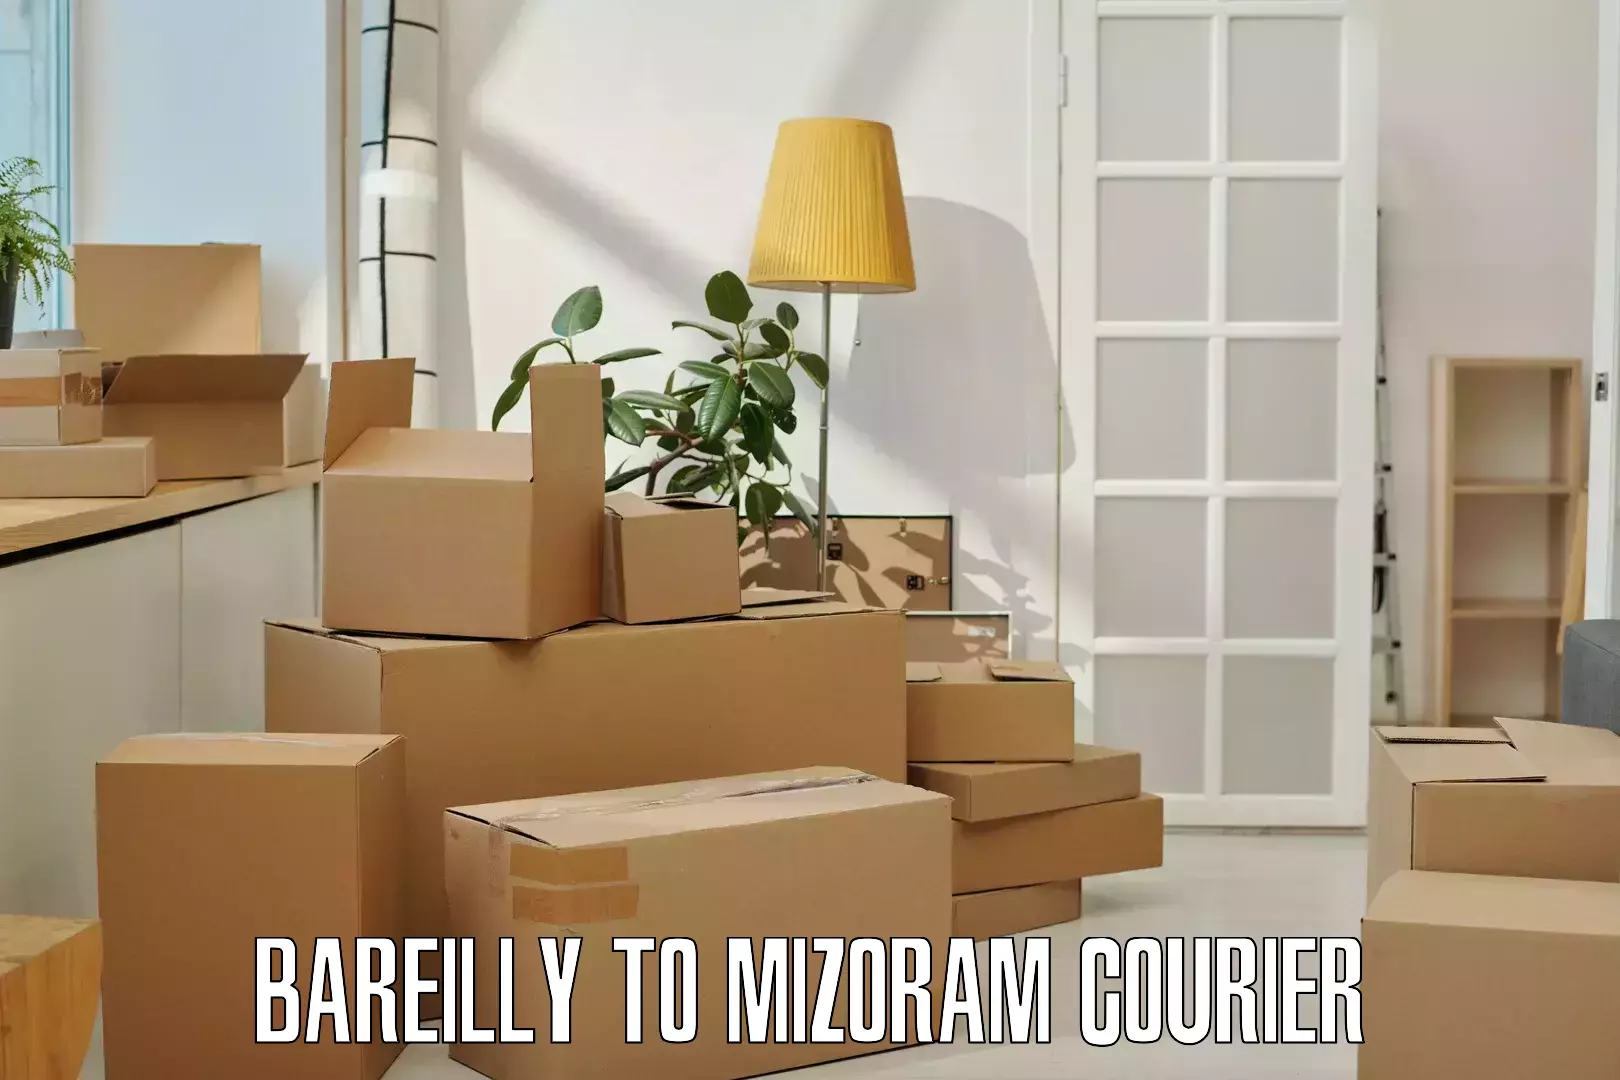 End-to-end delivery Bareilly to Mizoram